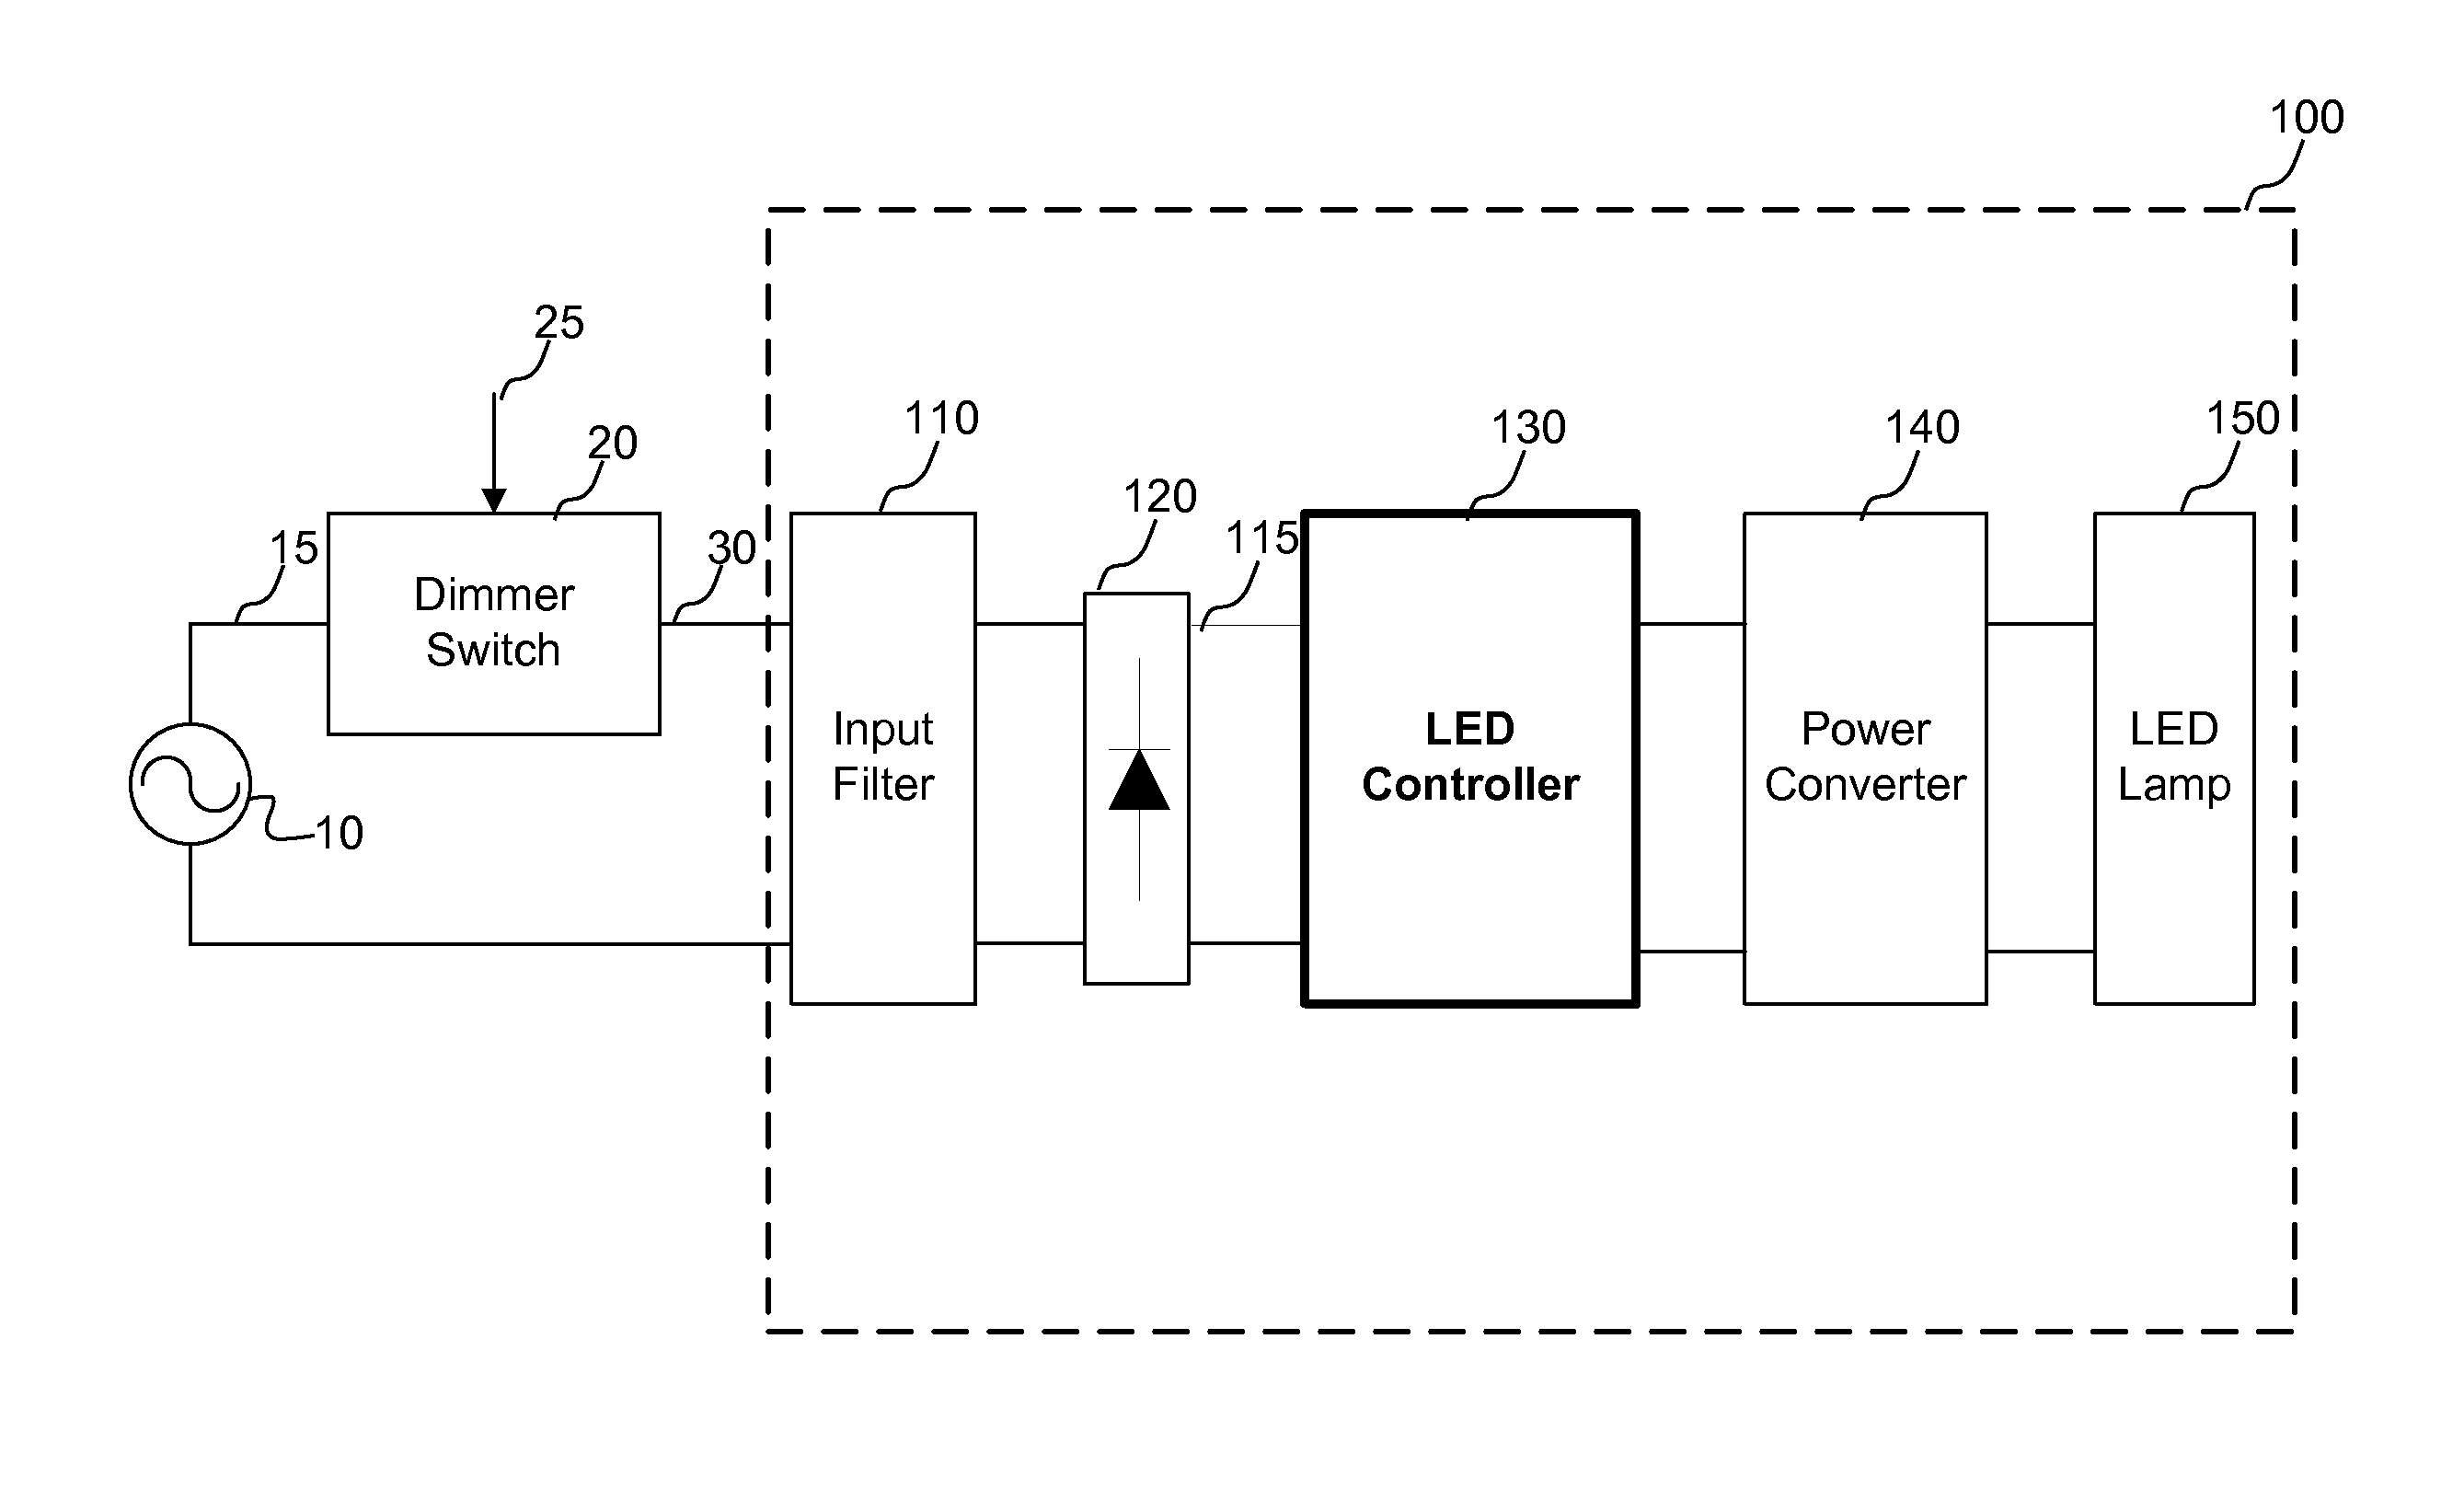 Adaptive holding current control for LED dimmer